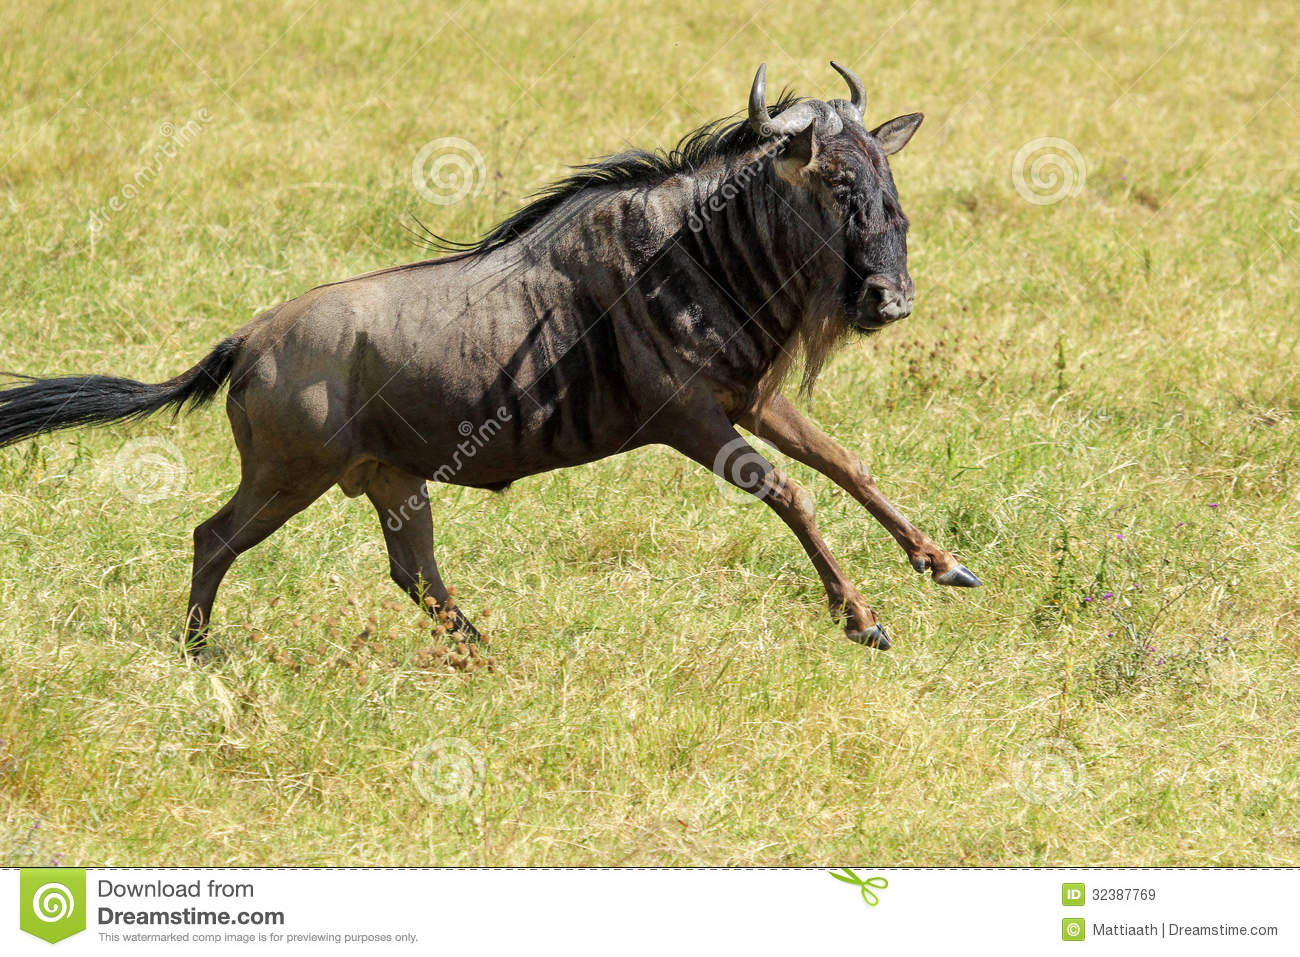 Blue Wildebeest clipart #12, Download drawings